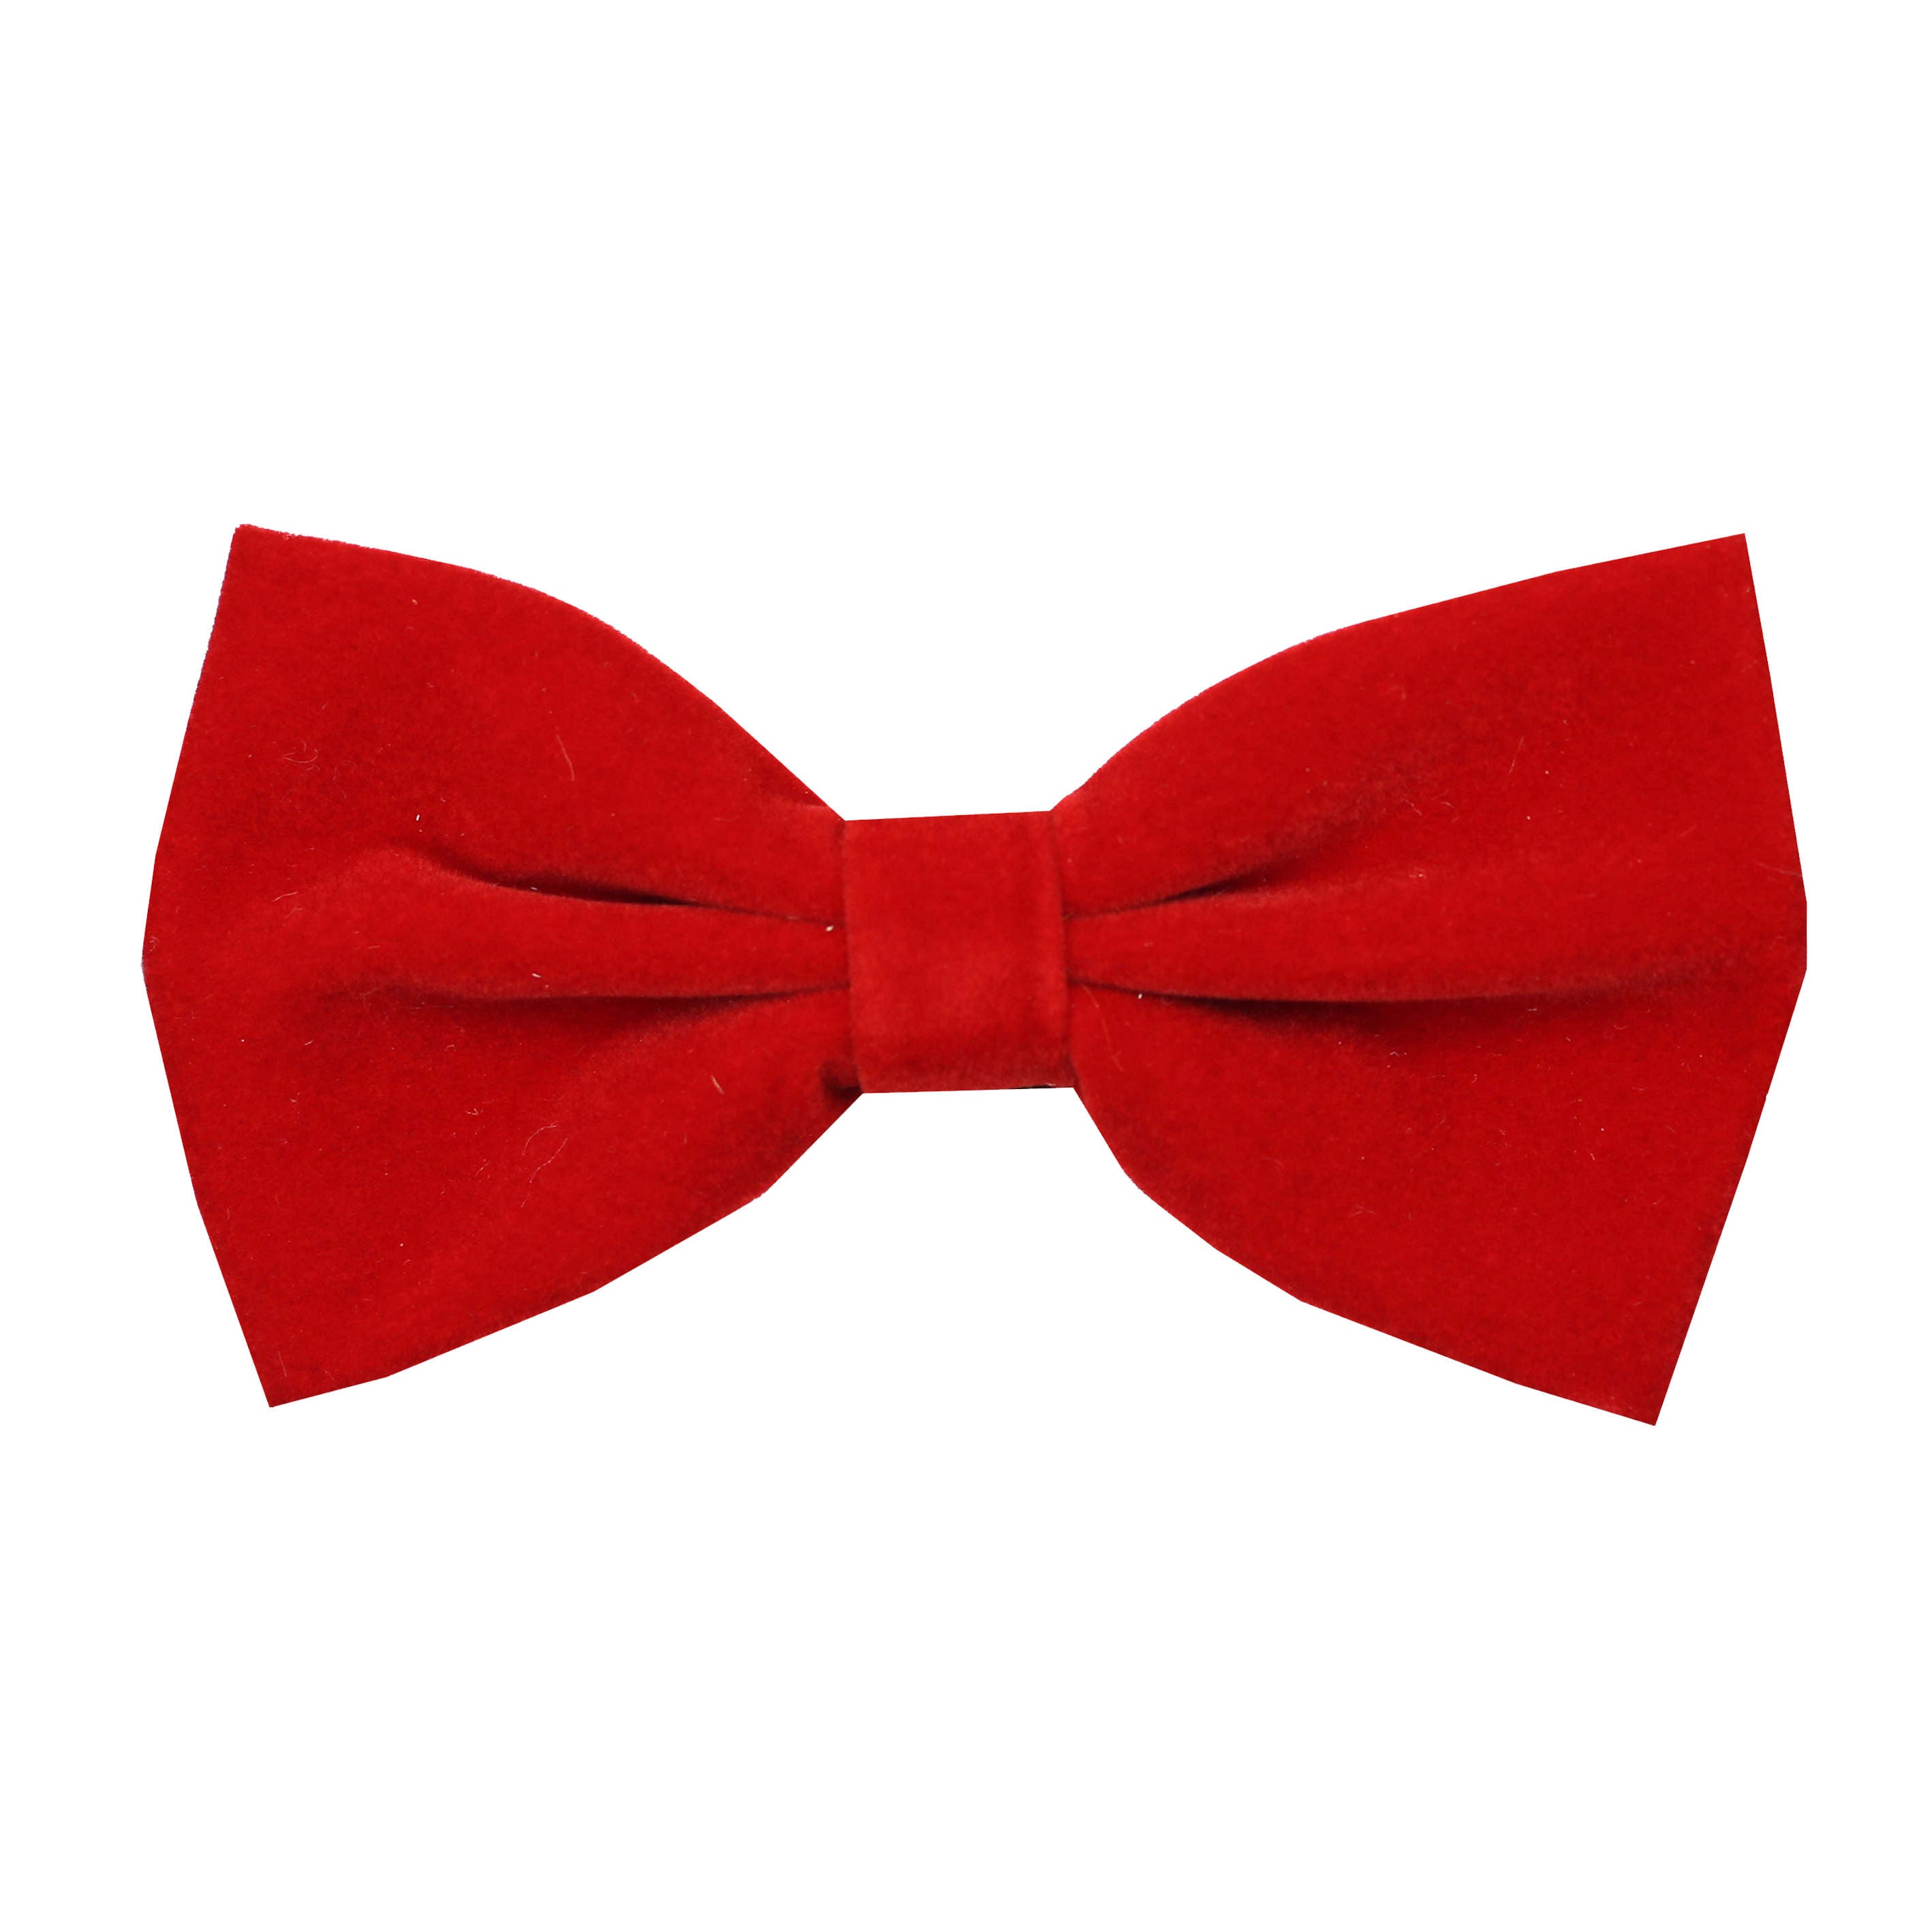 Red Velvet Bow Tie With Cufflink Pocket Square